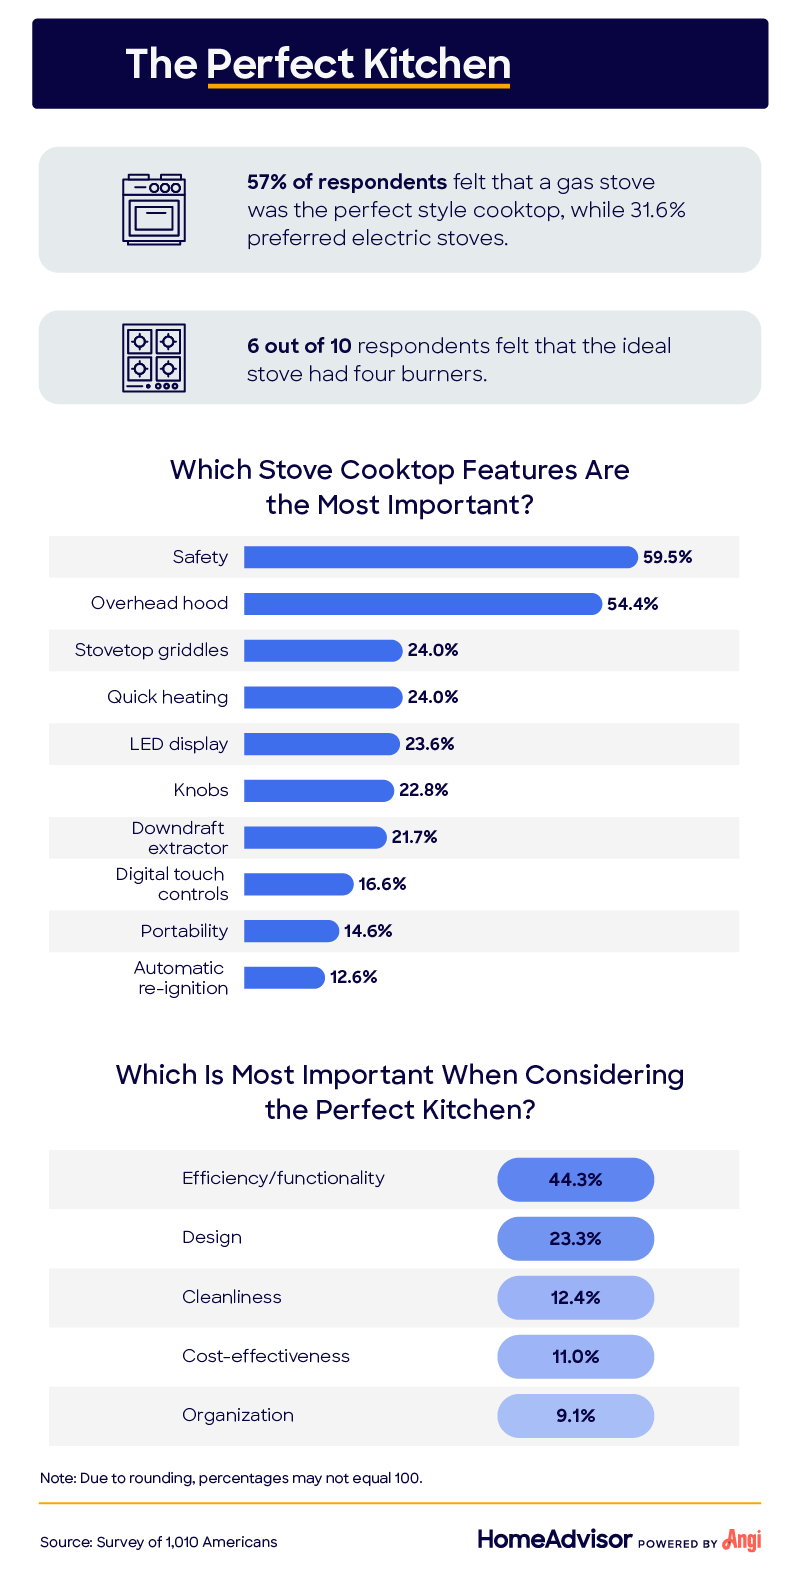 Stove cooktop features and other elements of a perfect kitchen according to study respondents